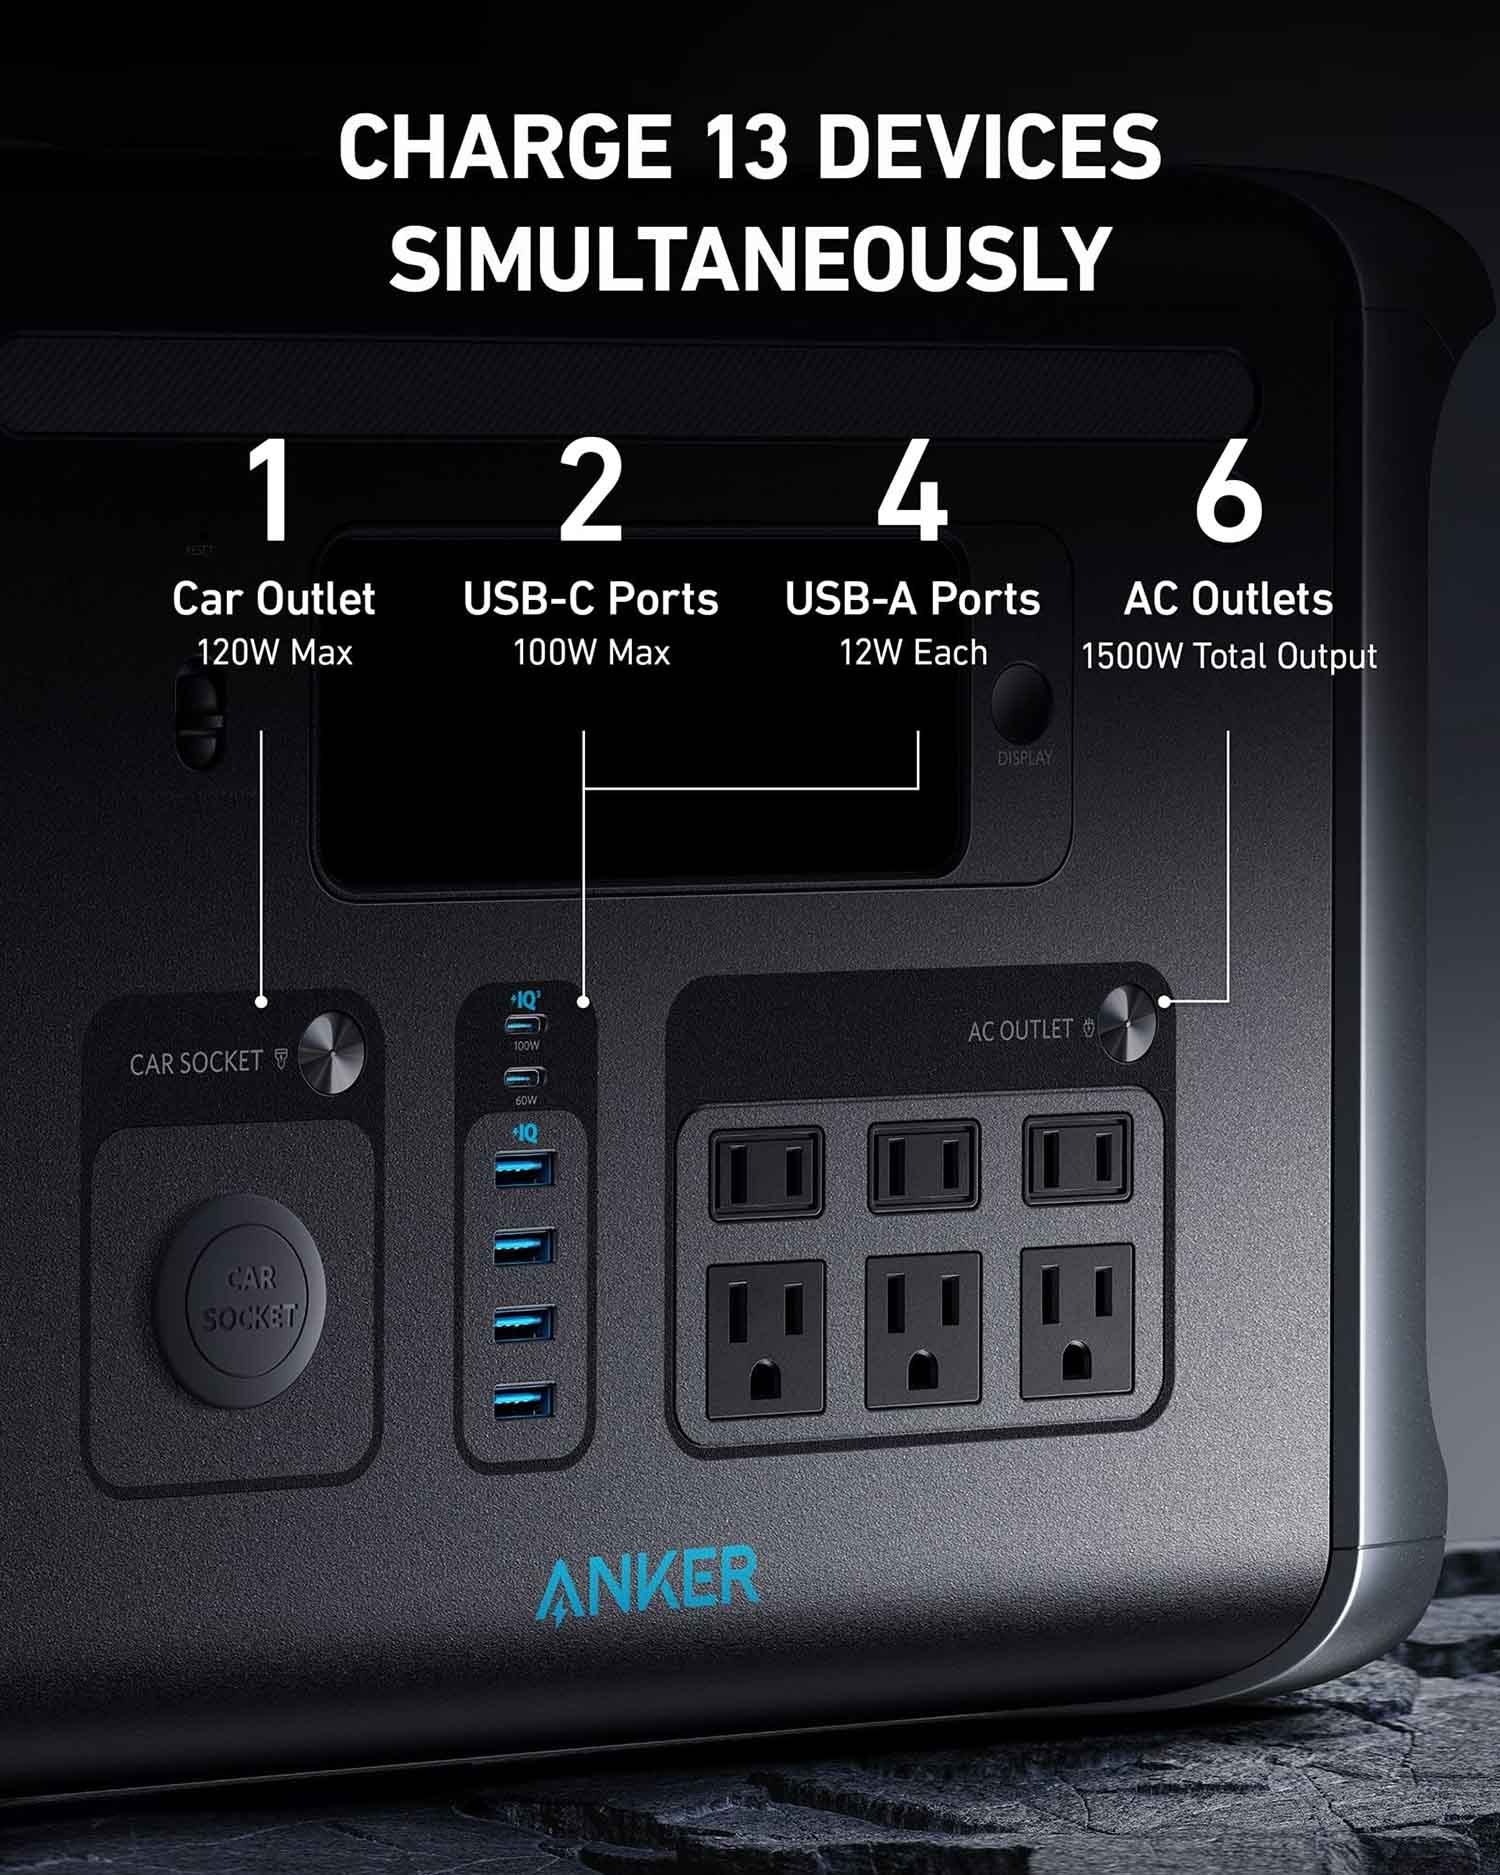 Charge 13 Devices Simultaneously With The Anker PowerHouse 757